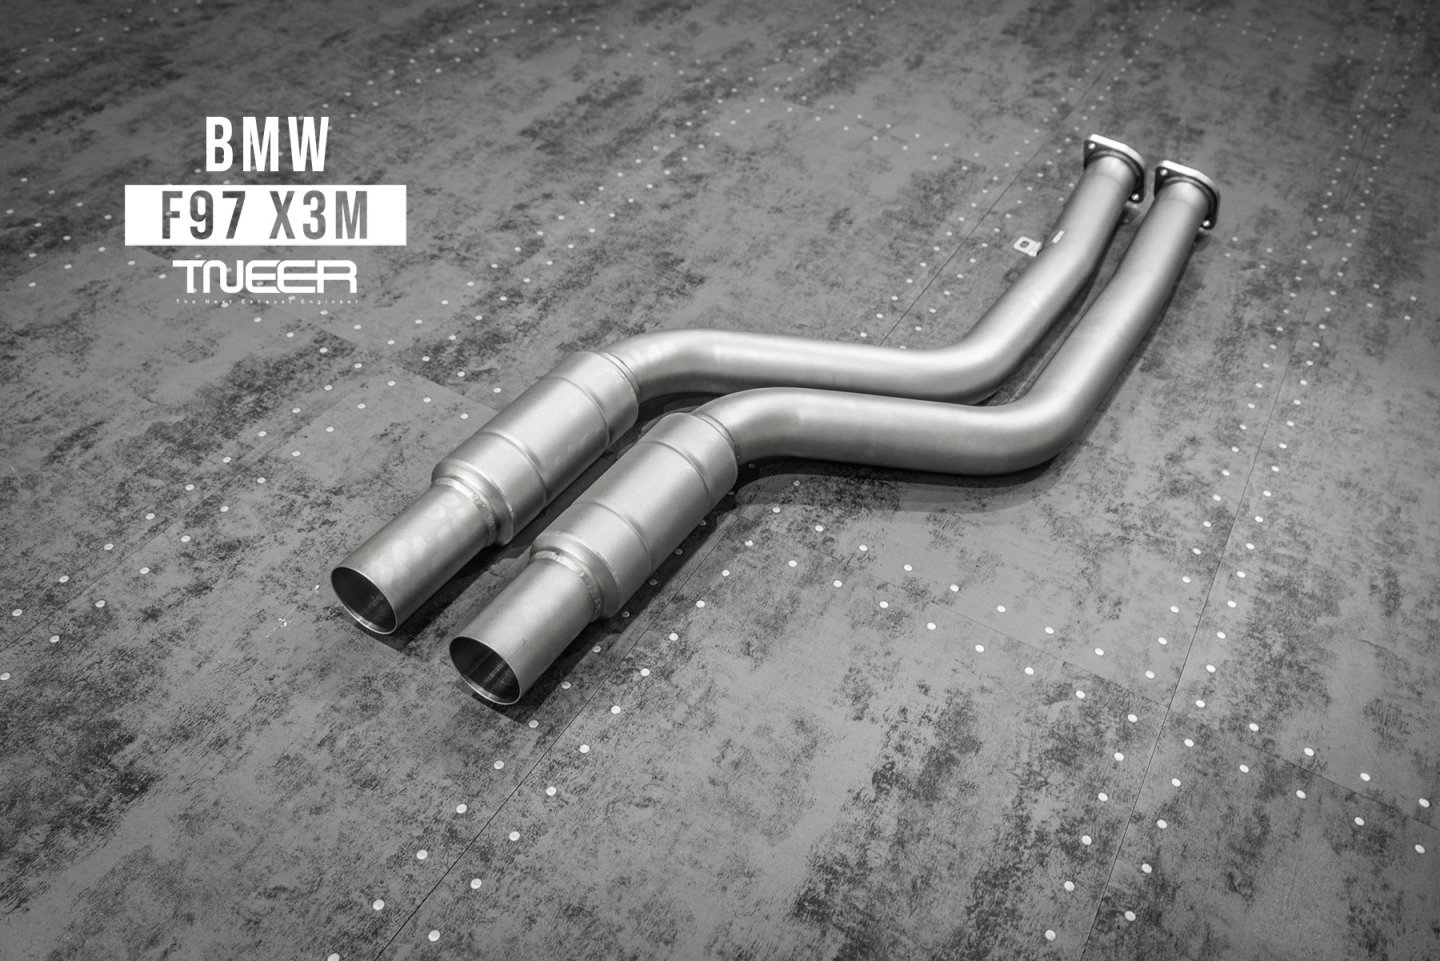 BMW F97 (X3M) Competition TNEER Exhaust System with EV and TACS